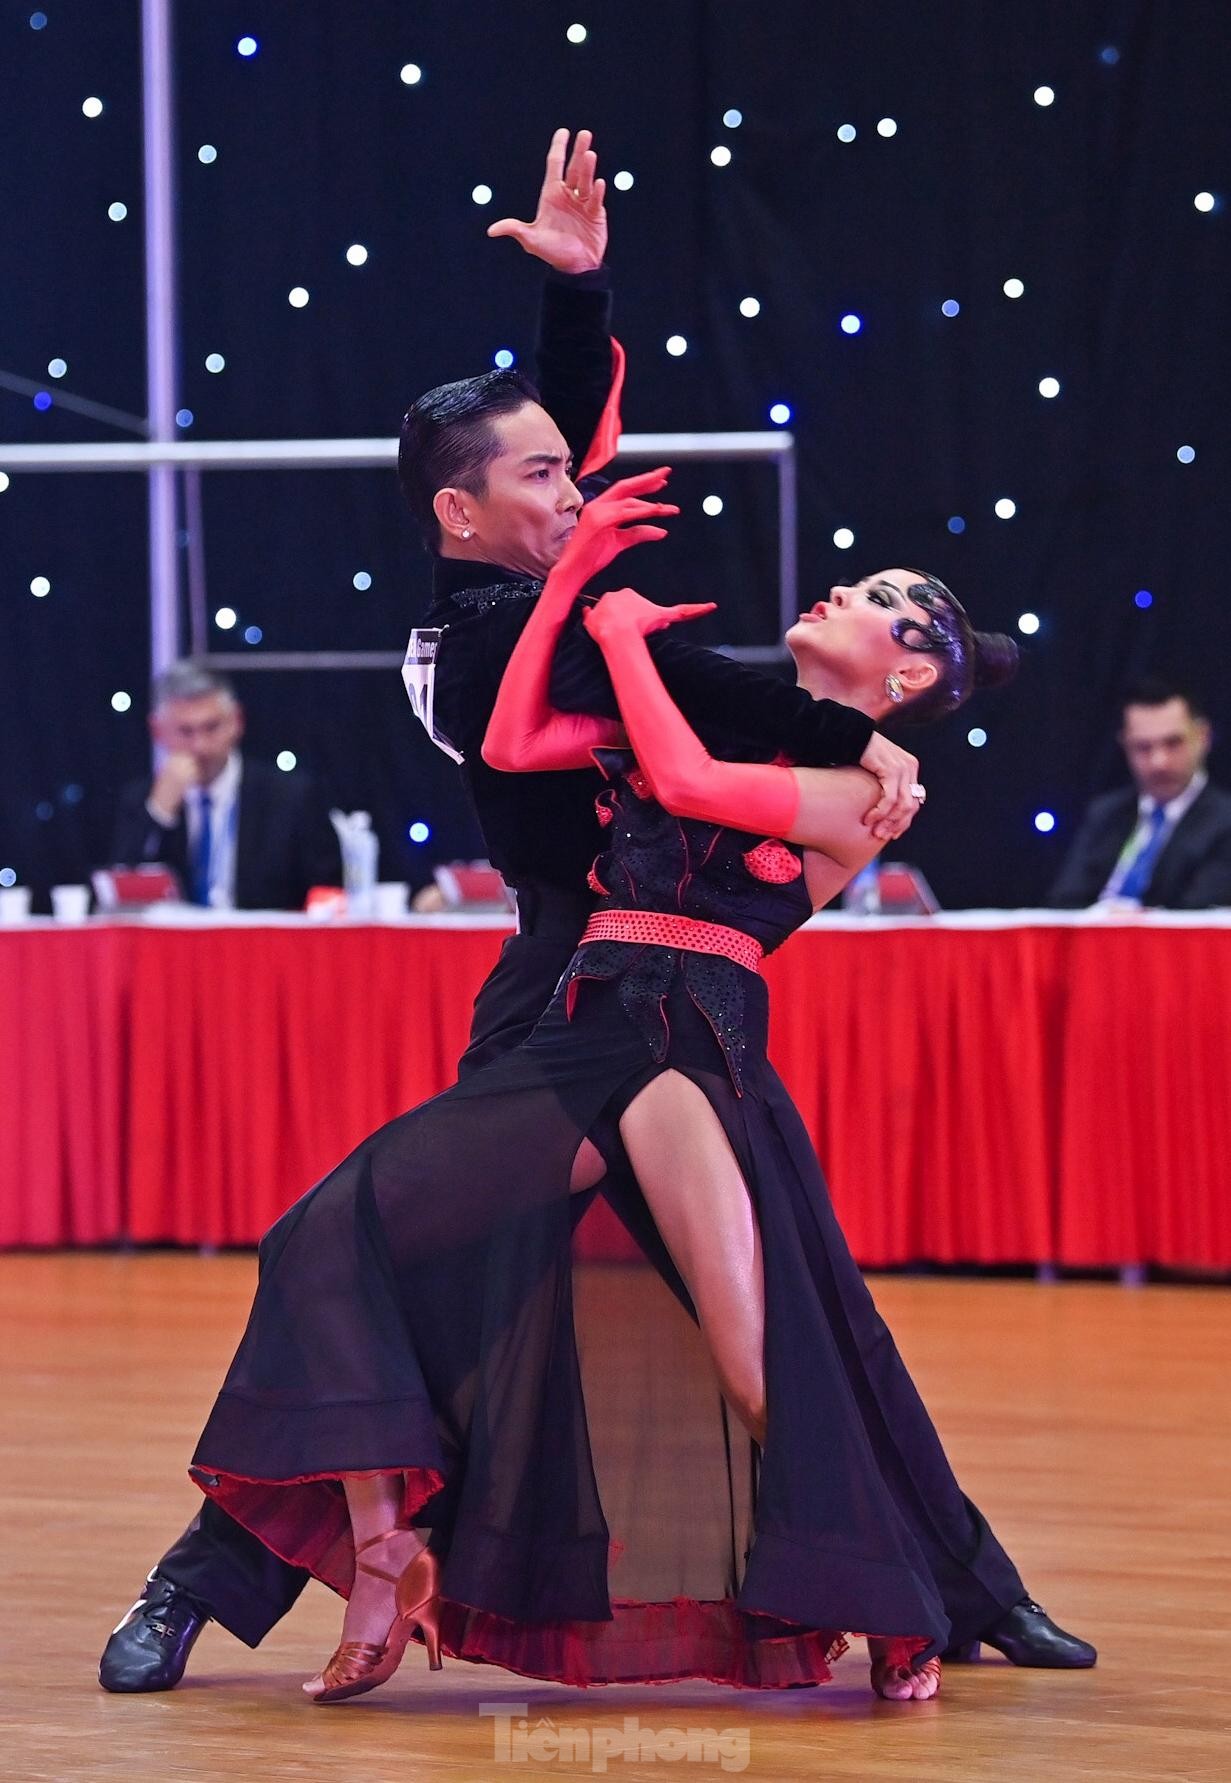 Watch the mesmerizing dance that helped Dancesport Vietnam win 5 gold medals at the 31st SEA Games - Photo 8.